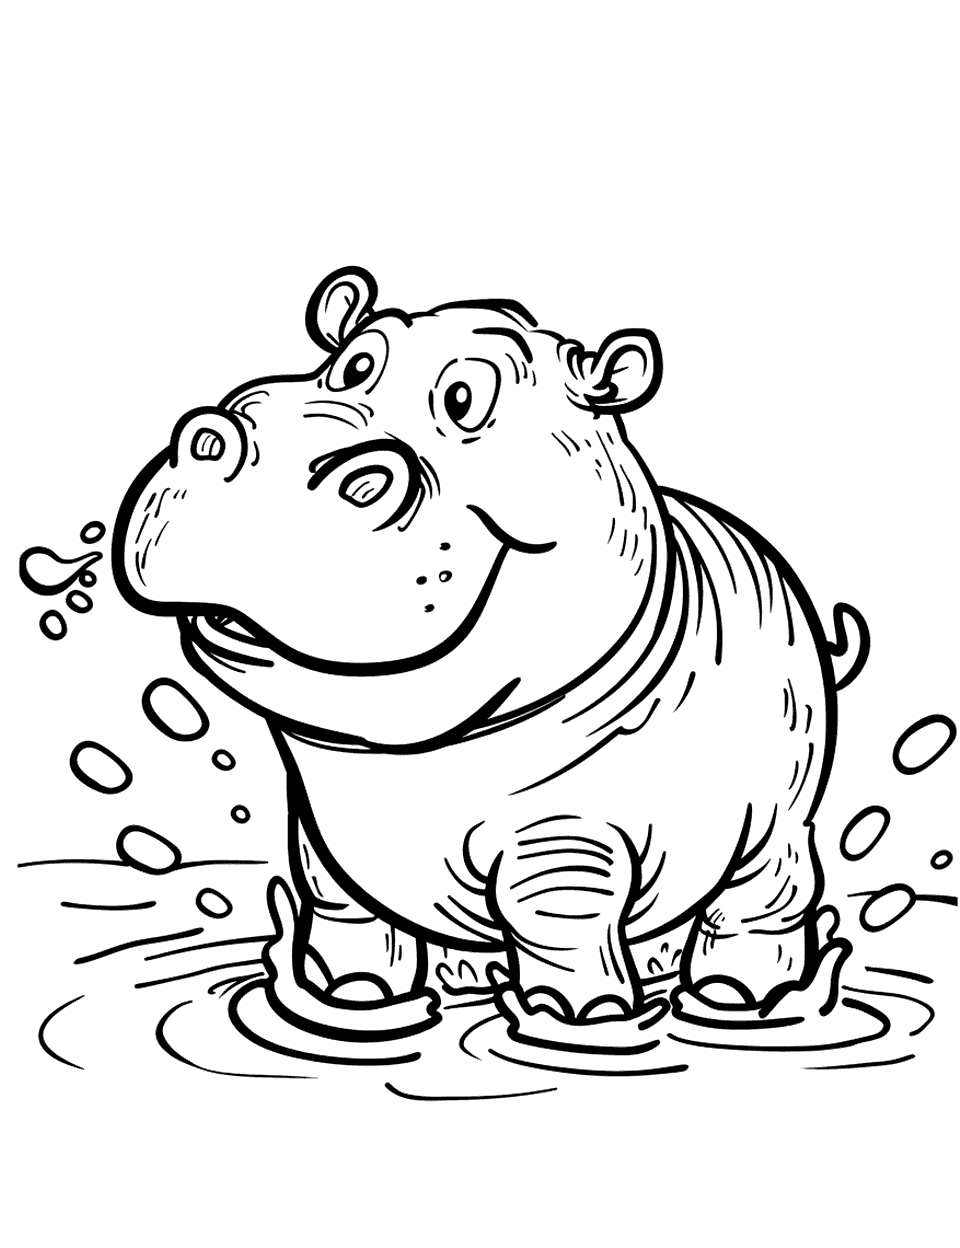 Baby Hippo Splash Coloring Page - A cute baby hippo happily splashing water in a pond.